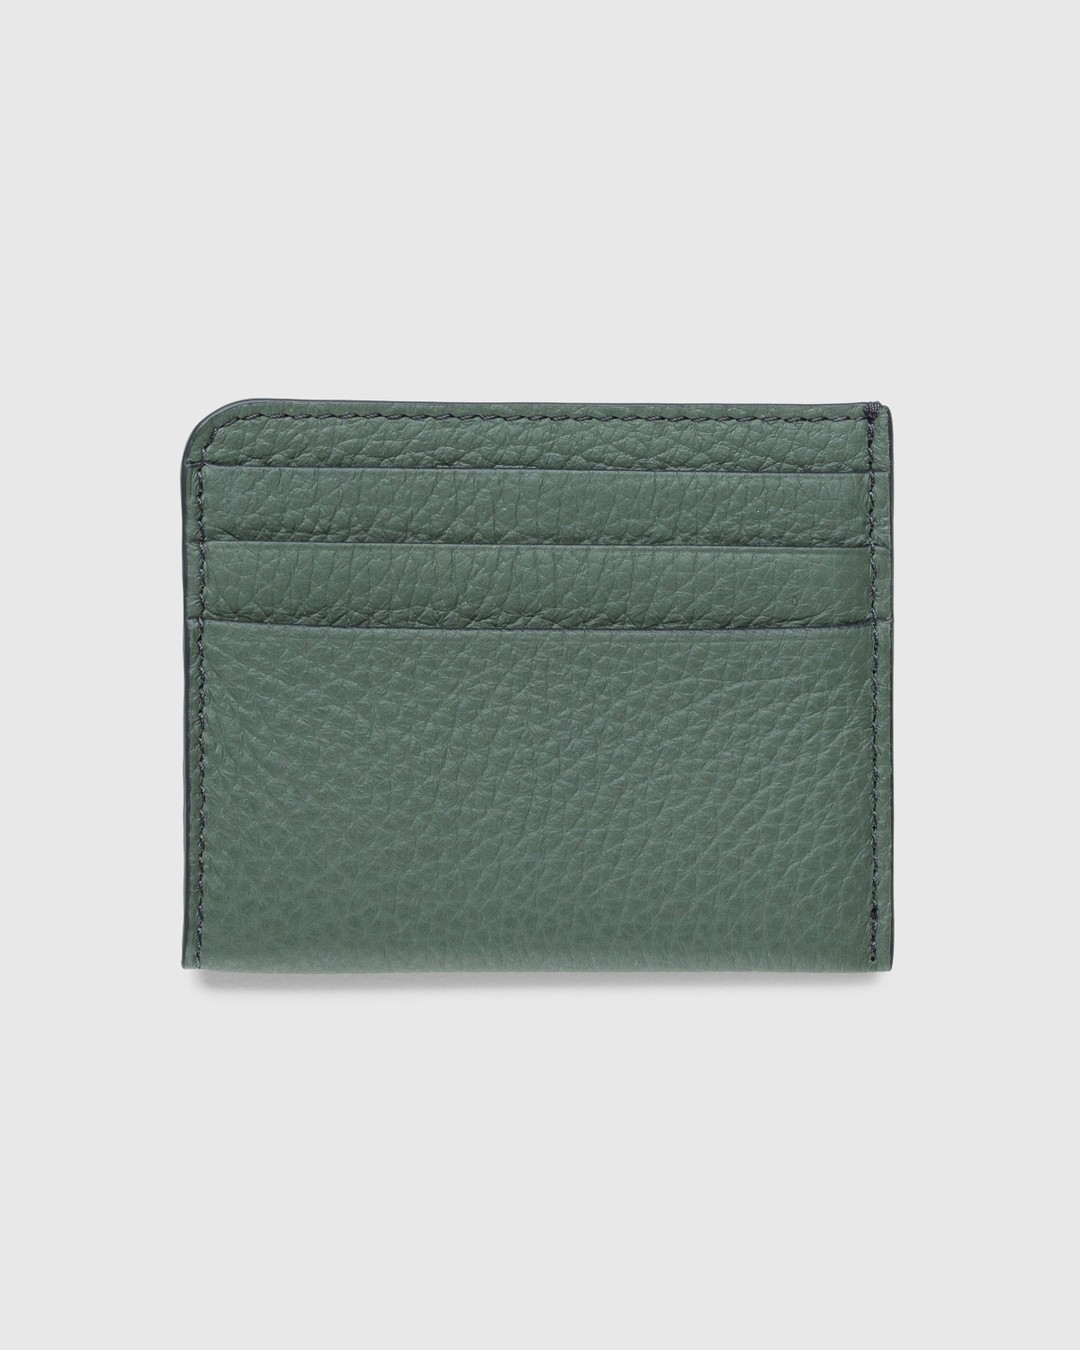 Maison Margiela – Leather Card Holder Thyme - Wallets - Green - Image 2